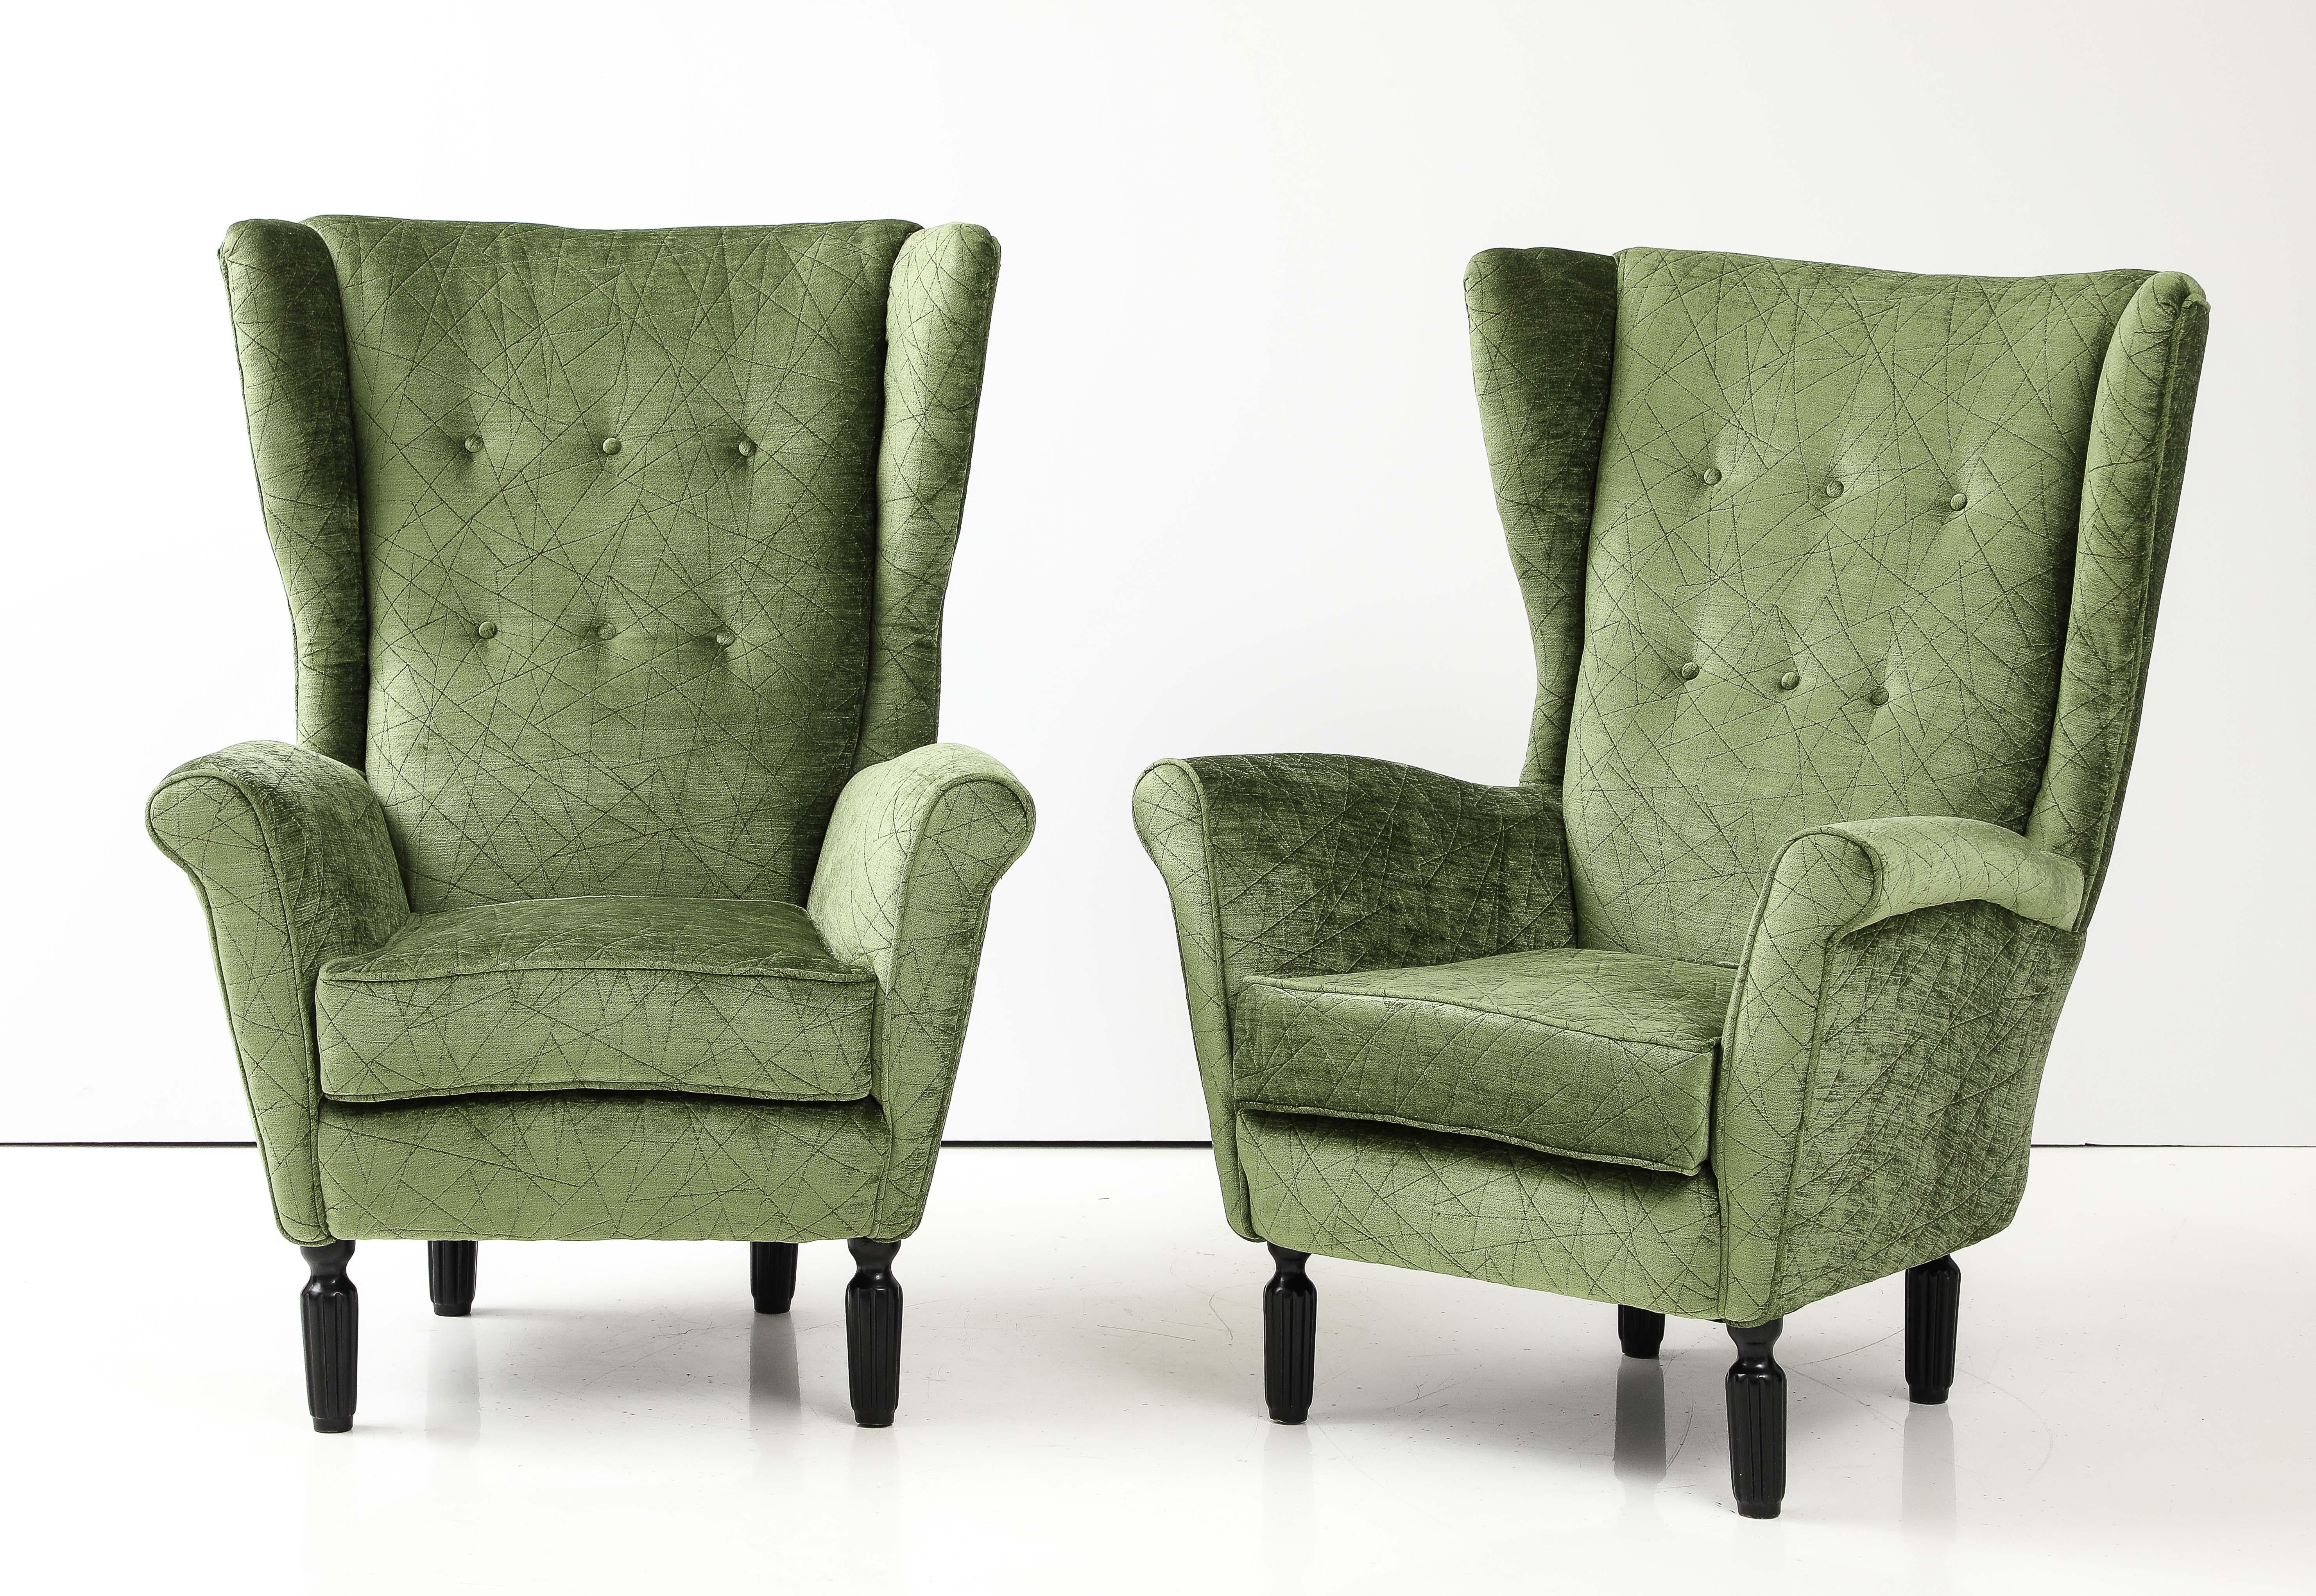 Amazing pair of 1950's wing-back Italian lounge chairs newly re-upholstered in velvet fabric, fully restored and re-upholstered, with minor wear and patina due to age and use.